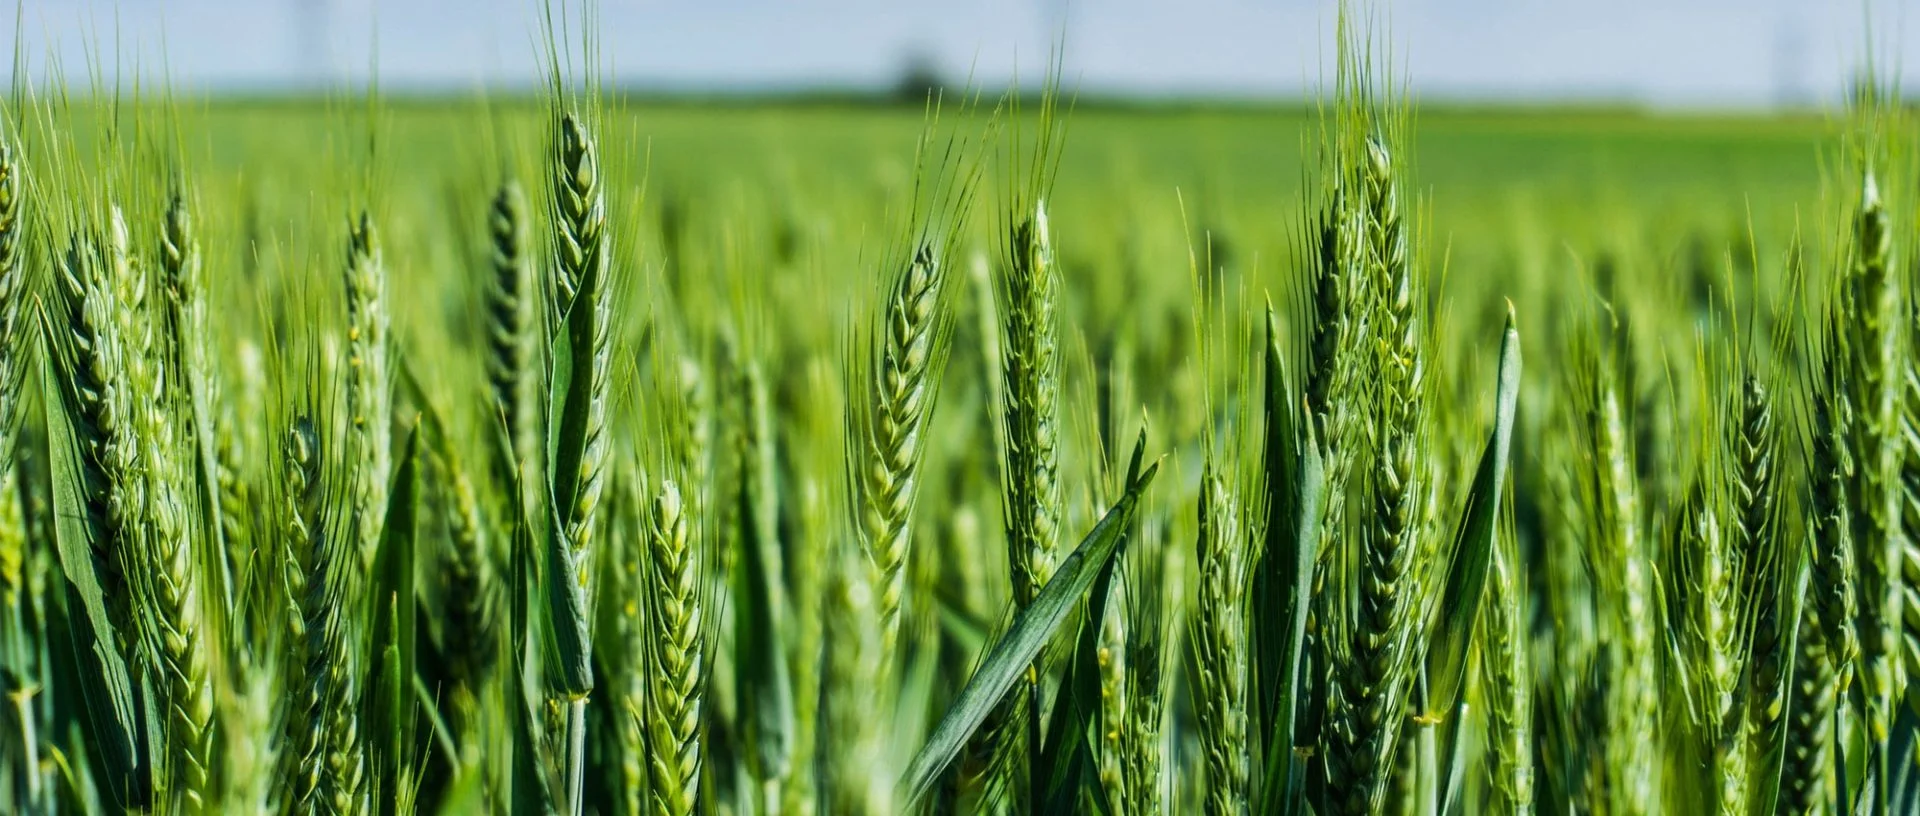 A Close Up Of Green Wheat Growing In A Field